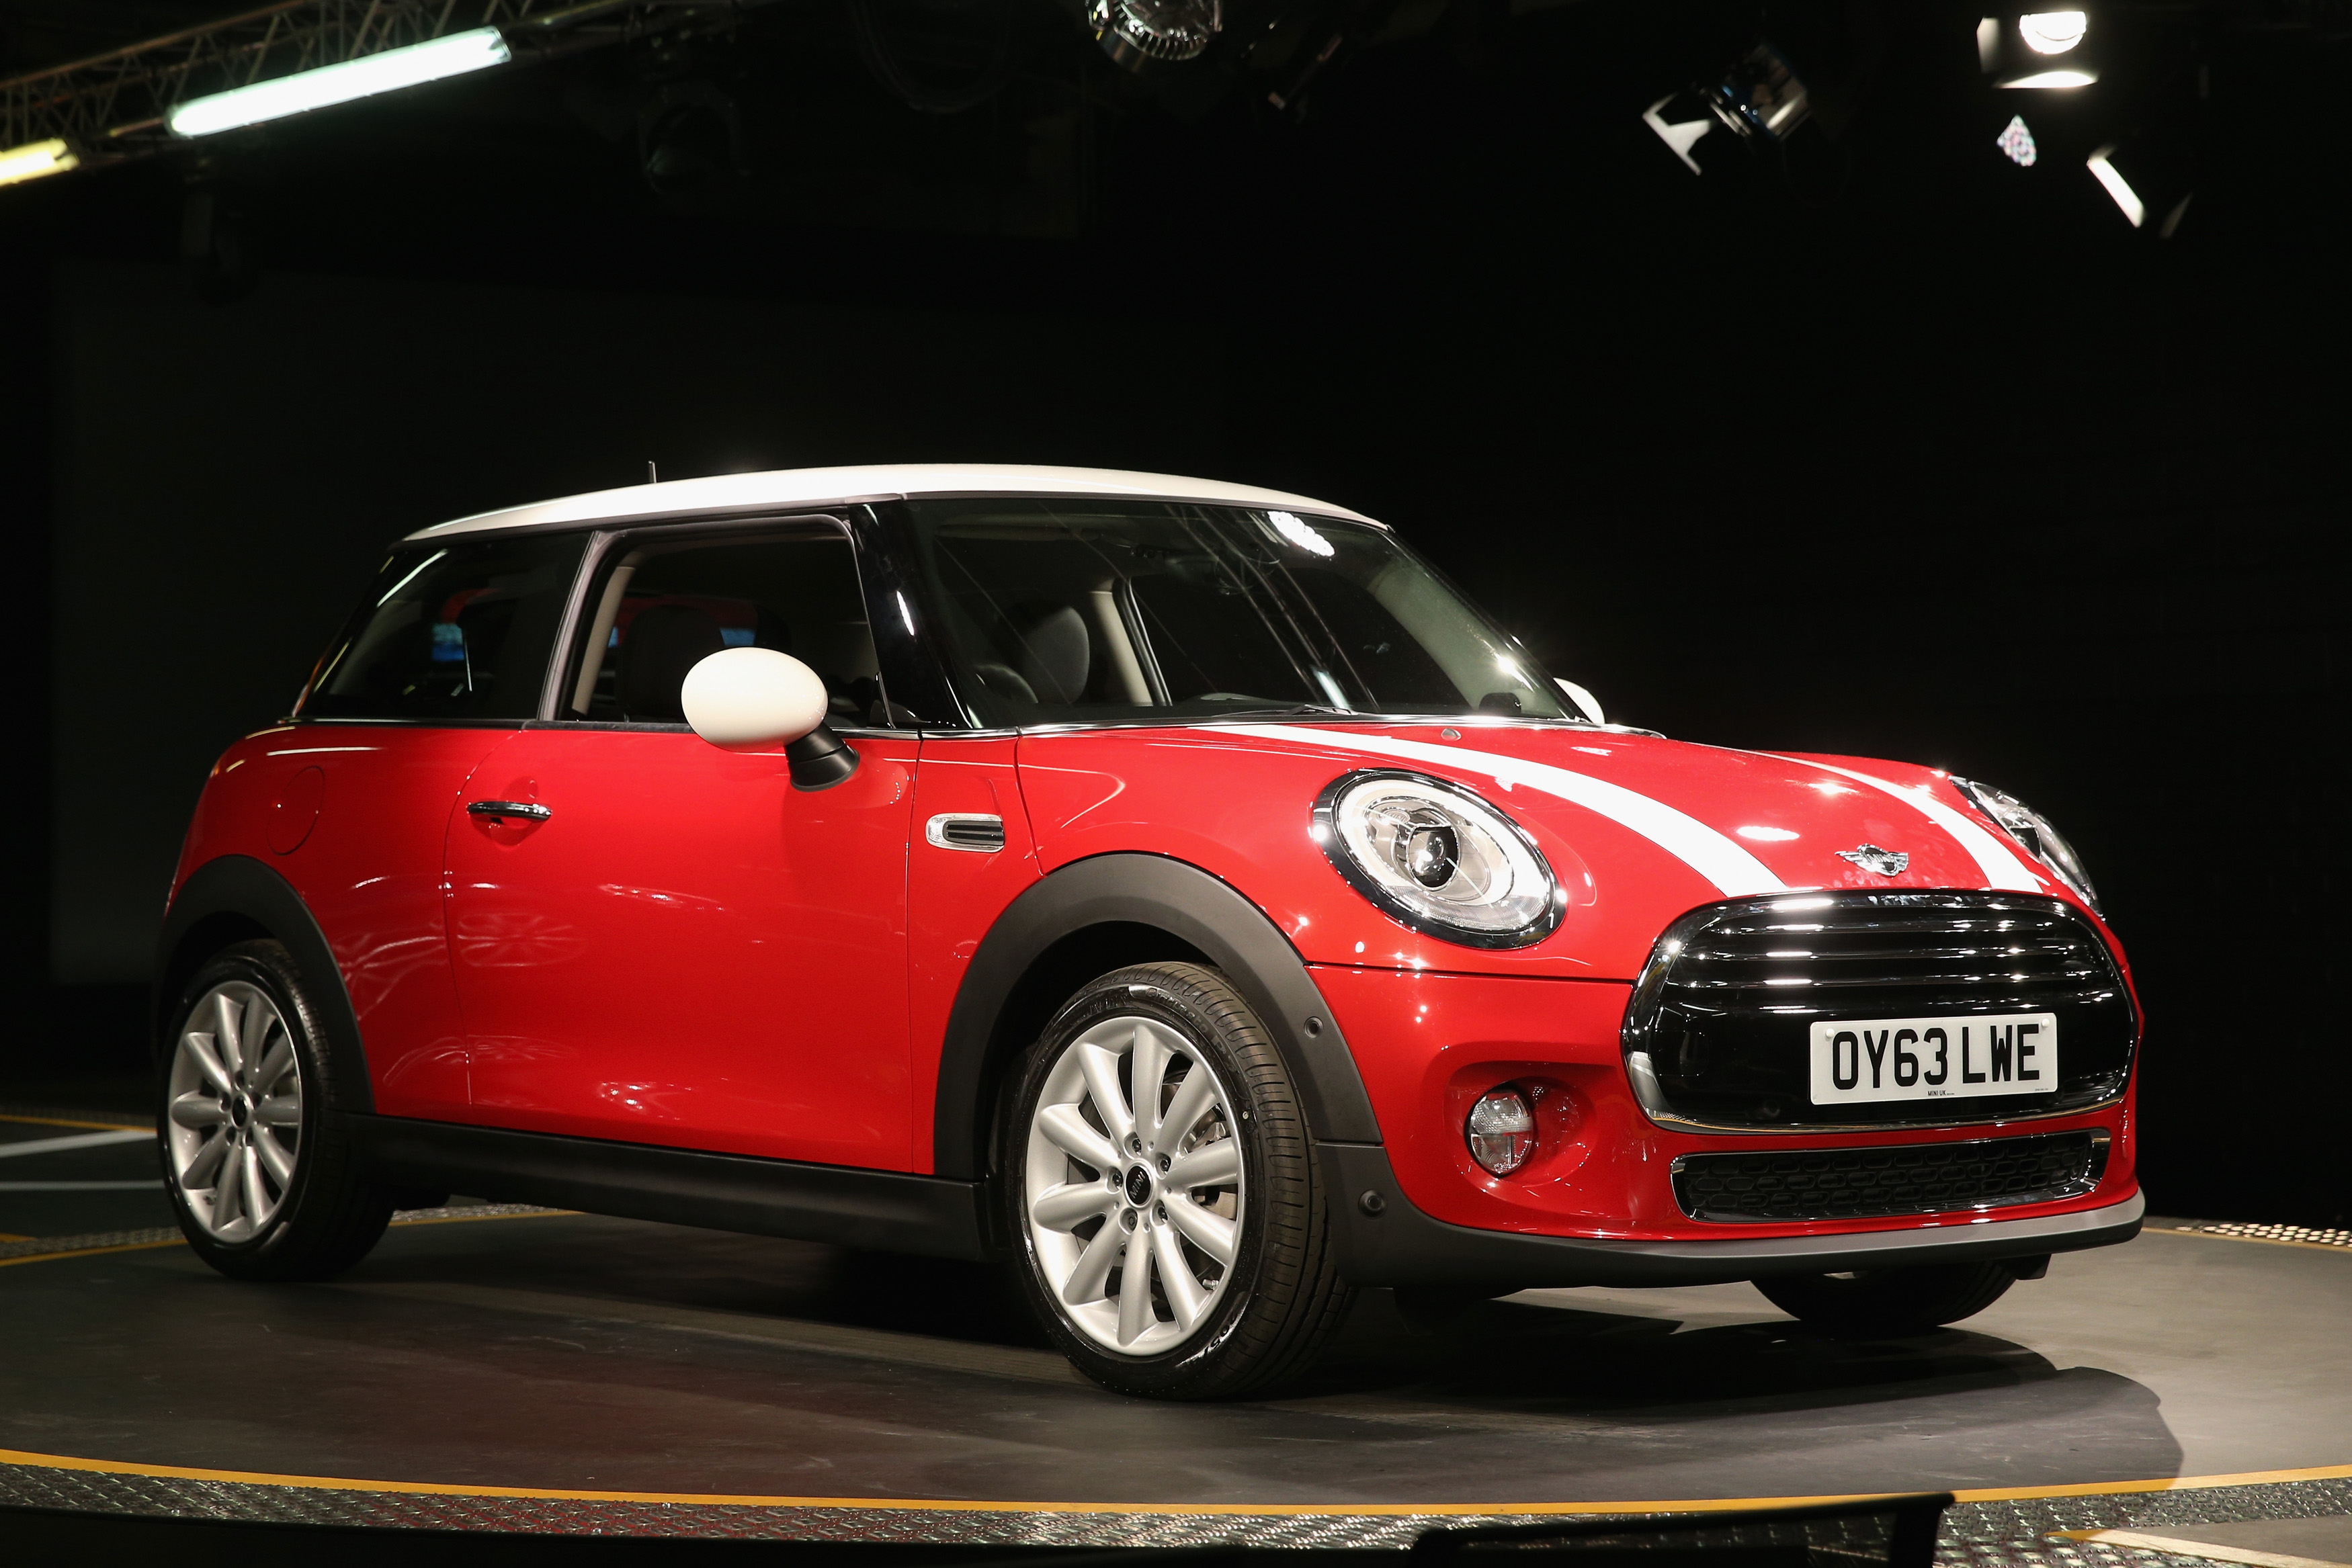 The Mini One D is road tax-free as turbocharge engines mean it emits less than 100gpk of Carbon Dioxide